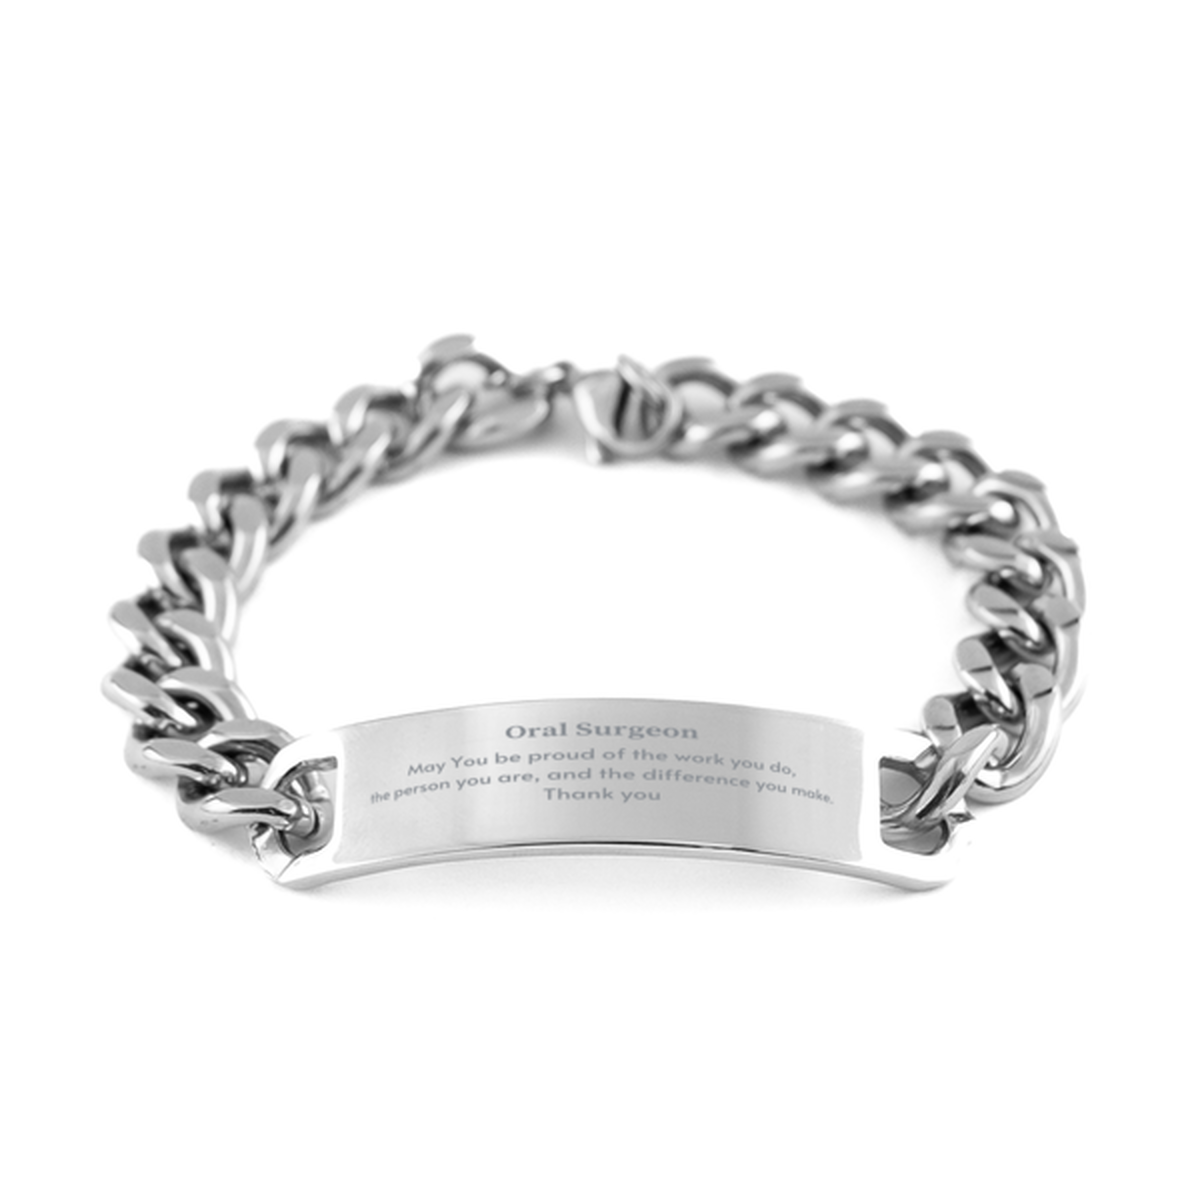 Heartwarming Cuban Chain Stainless Steel Bracelet Retirement Coworkers Gifts for Oral Surgeon, Oral Surgeon May You be proud of the work you do, the person you are Gifts for Boss Men Women Friends